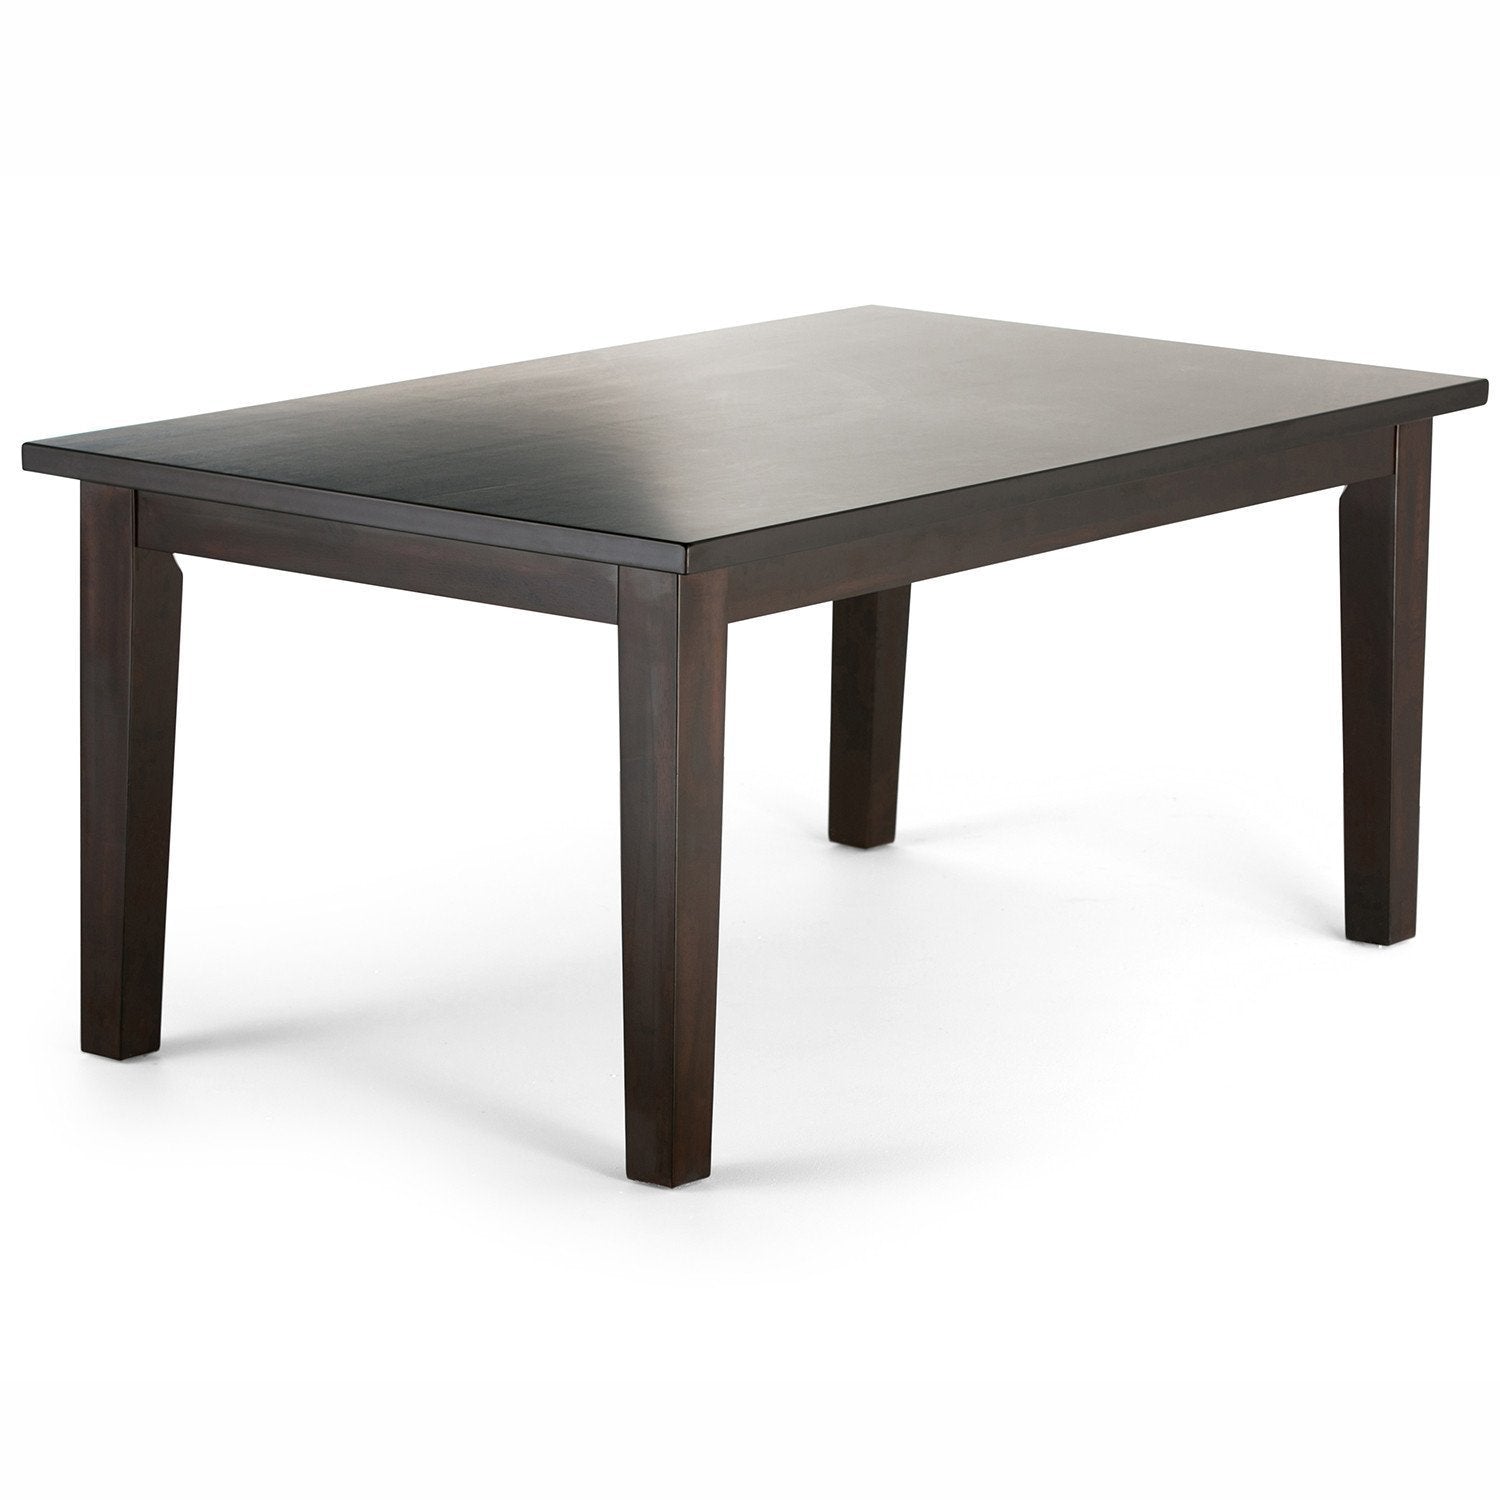 Java Brown Rubberwood | Eastwood 66 x 40 inch Rectangle Dining Table